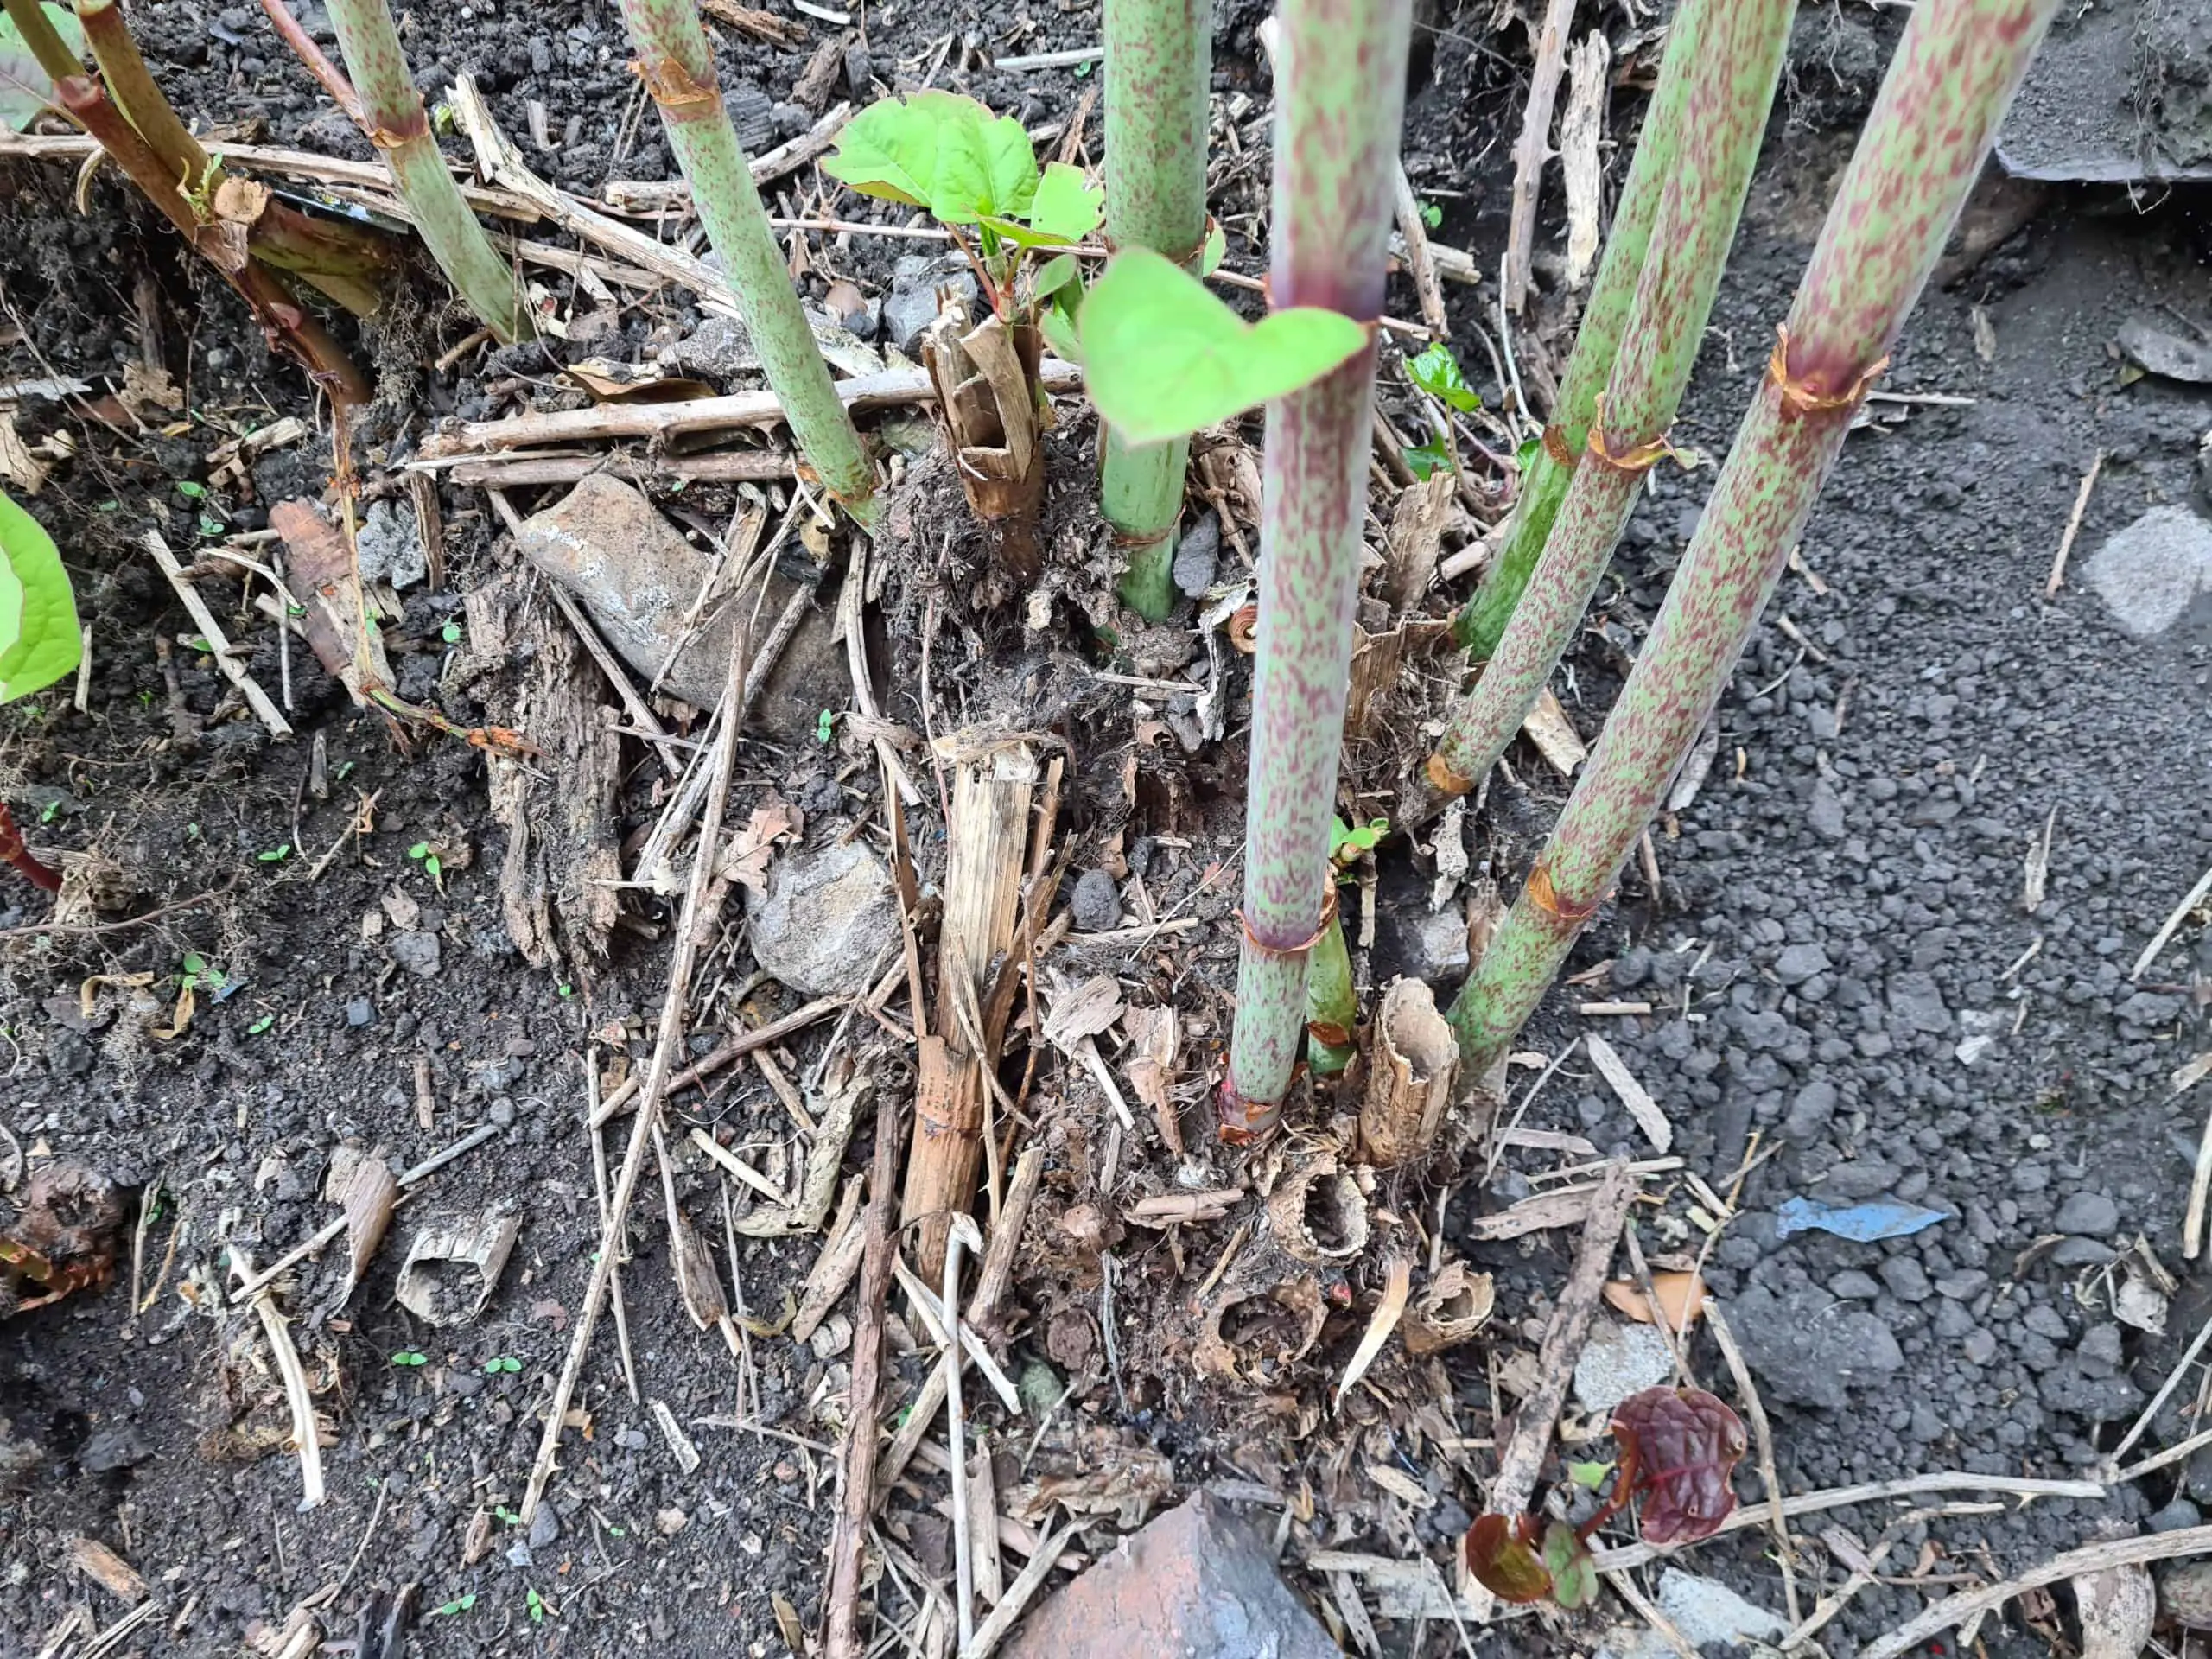 Undertaking Japanese Knotweed removal DIY style can work if you have the right tools